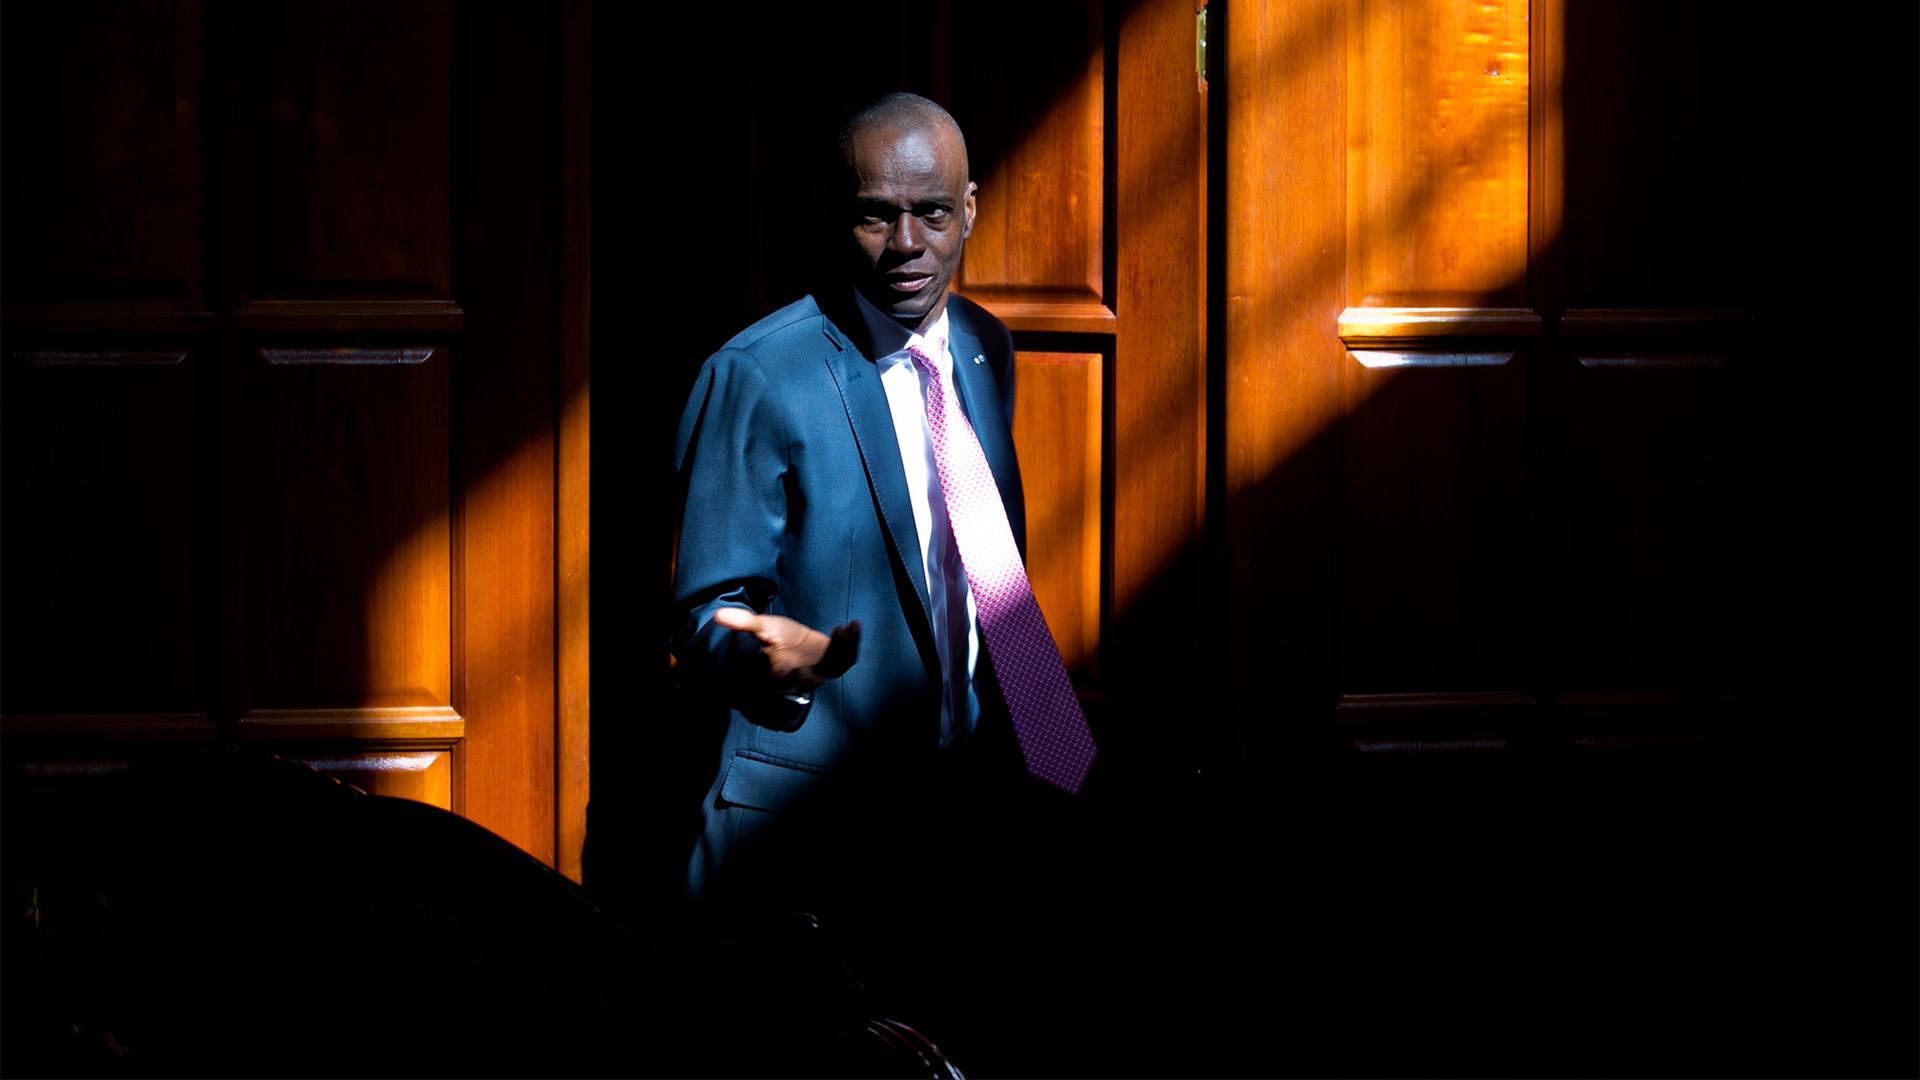 Haitian President Jovenel Moise arrives for an interview at his home in Petion-Ville, a suburb of Port-au-Prince, Haiti